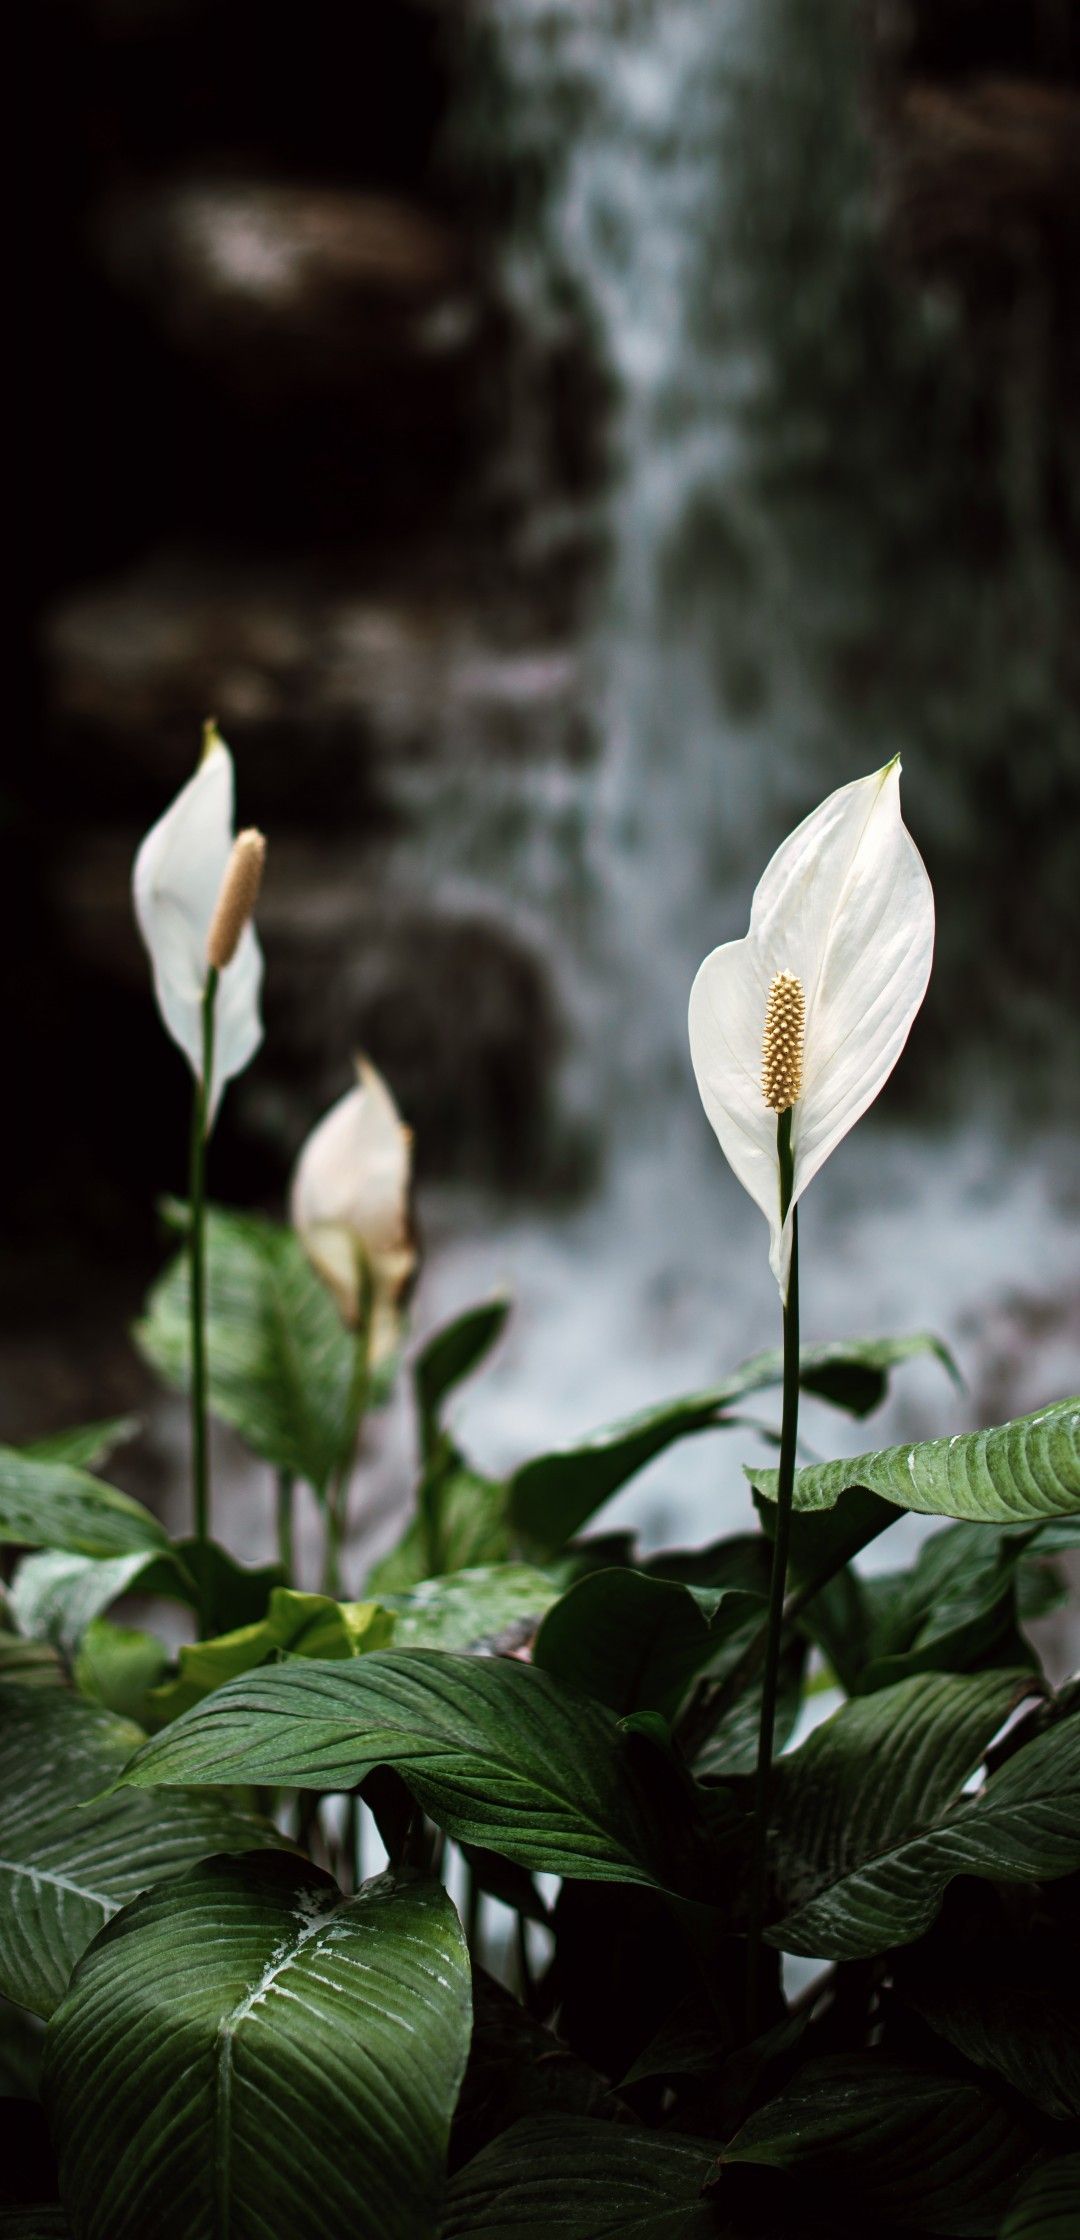 Download 1080x2240 White Lily, Petals, Blurry, Leaves Wallpaper